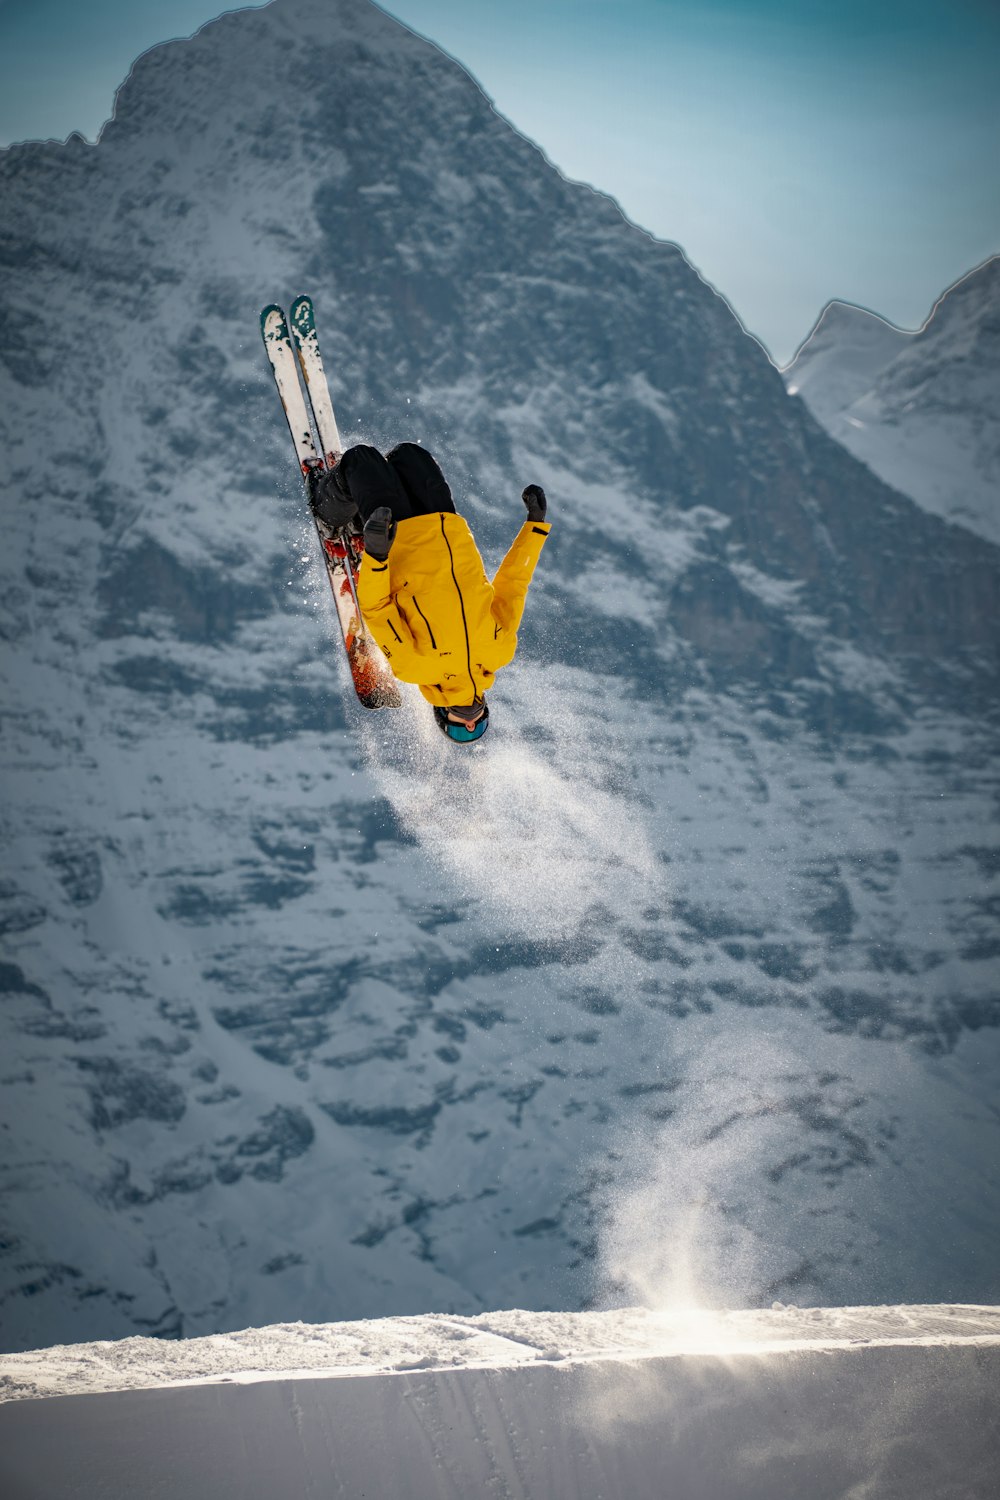 man in yellow jacket and blue denim jeans riding orange snowboard on snow covered mountain during